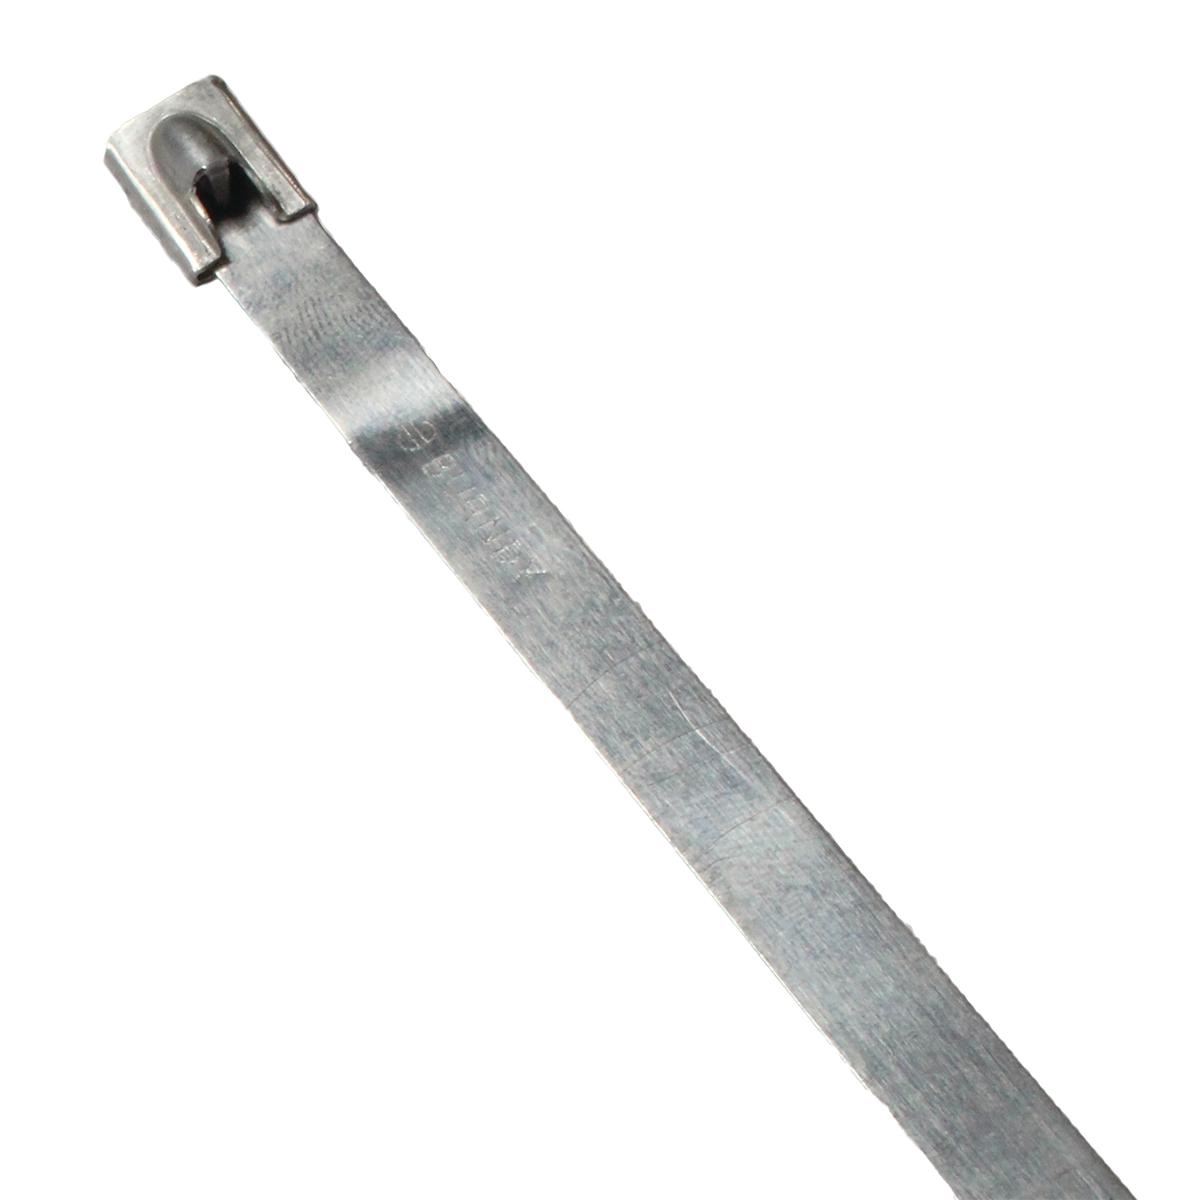 Hubbell CTSS500600304L Uncoated stainless steel cable ties 304 grade, Tensile strength: 500 Lb, 23.62" L, 0.31" W, 6.07" Bundle Dia.  ; Smooth, rounded edges help ensure safe, efficient handling ; Ergonomically designed installation tools consistently tensions and cuts off ties